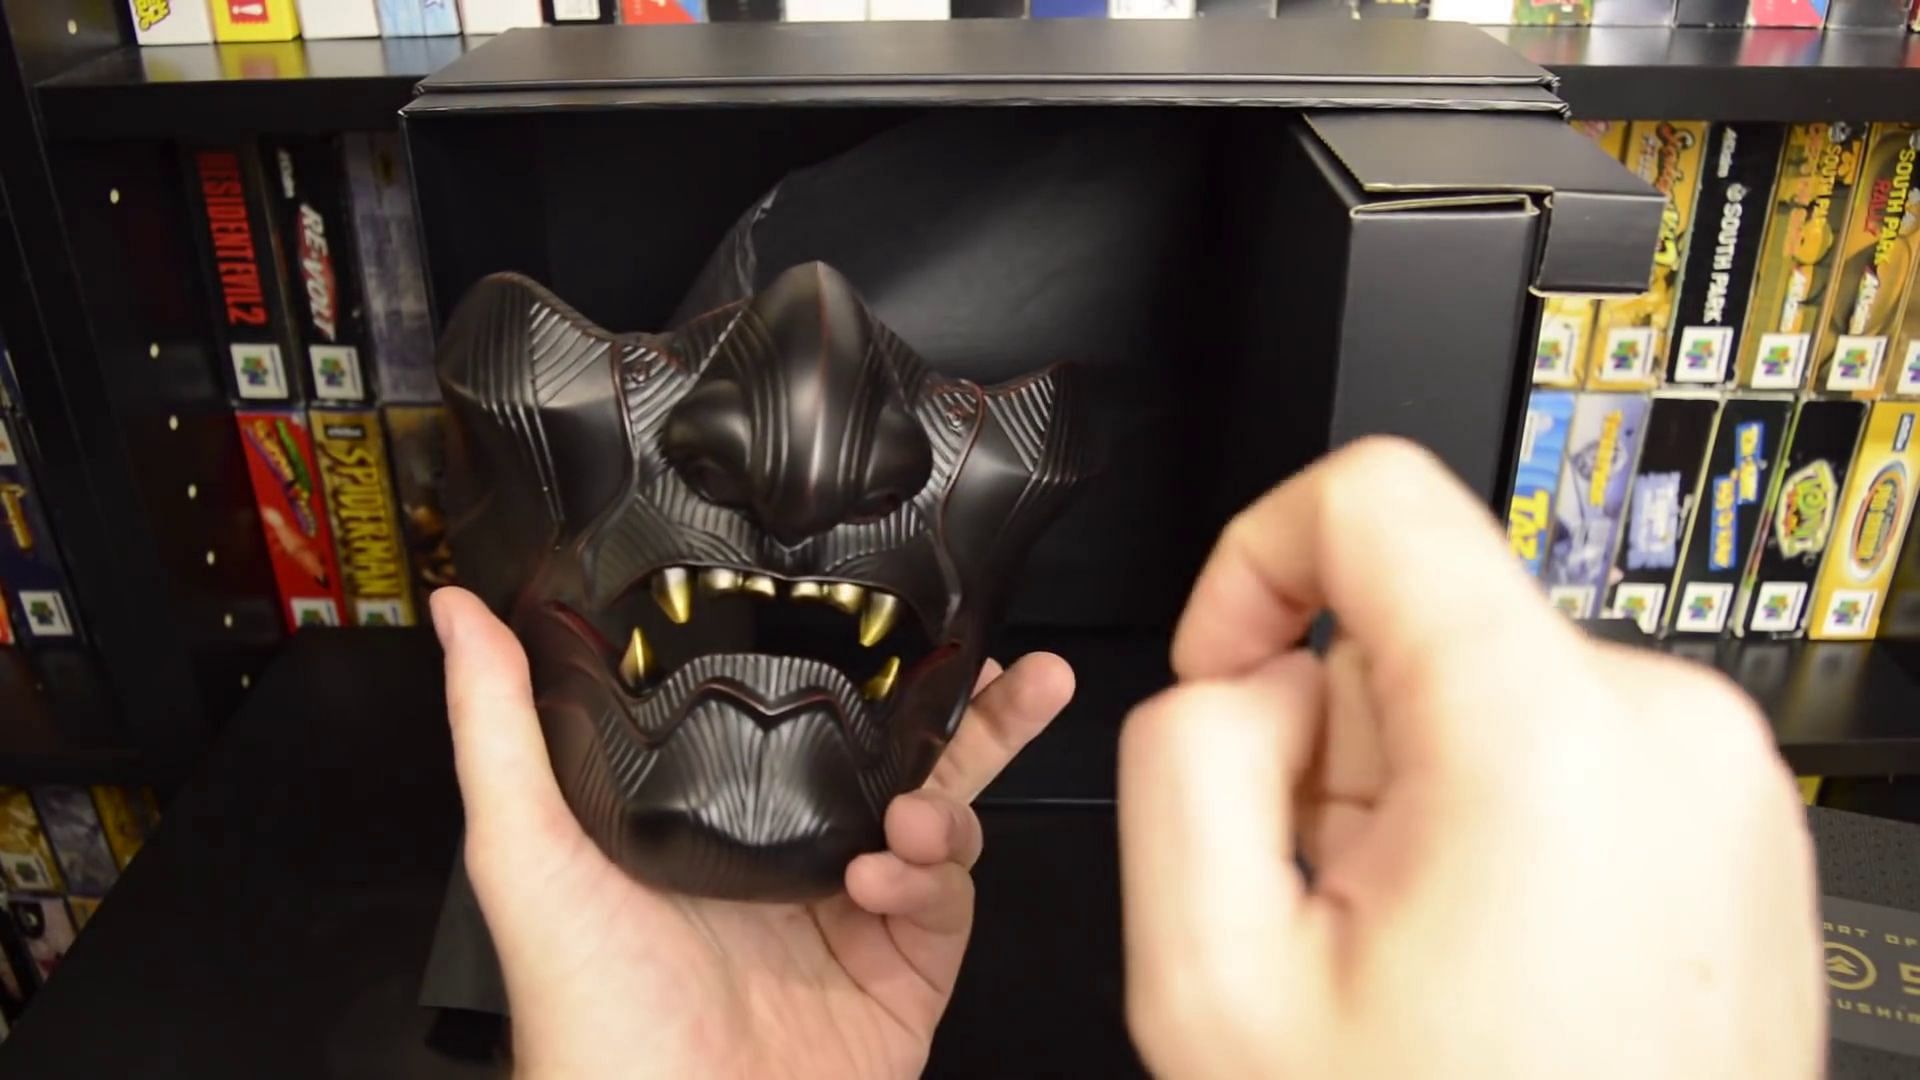 The Sakai Mask comes with a stand for showcasing (Image via YouTube/finngamer)